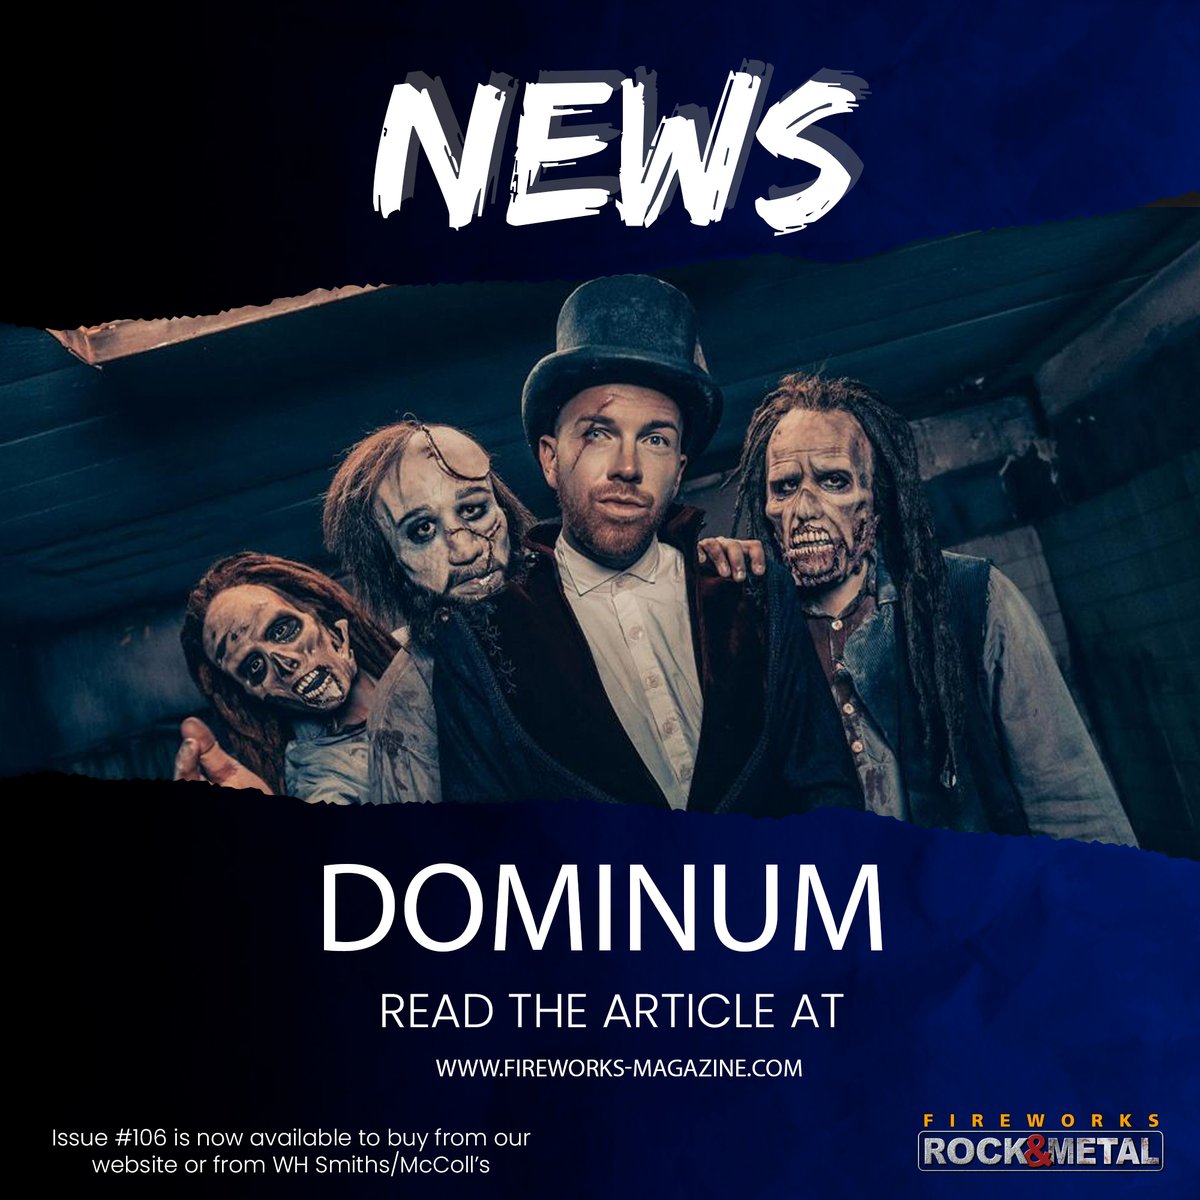 𝗟𝗢𝗩𝗘 𝗜𝗧! Zombie Metal Outfit DOMINUM Unleash a Dramatic New Music Video for “We All Taste The Same”

𝘙𝘦𝘢𝘥 𝘢𝘣𝘰𝘶𝘵 𝘪𝘵 𝘩𝘦𝘳𝘦: wix.to/CICRO3y

@NapalmRecords 

--

BUY Issue #106 from fireworks-magazine.com